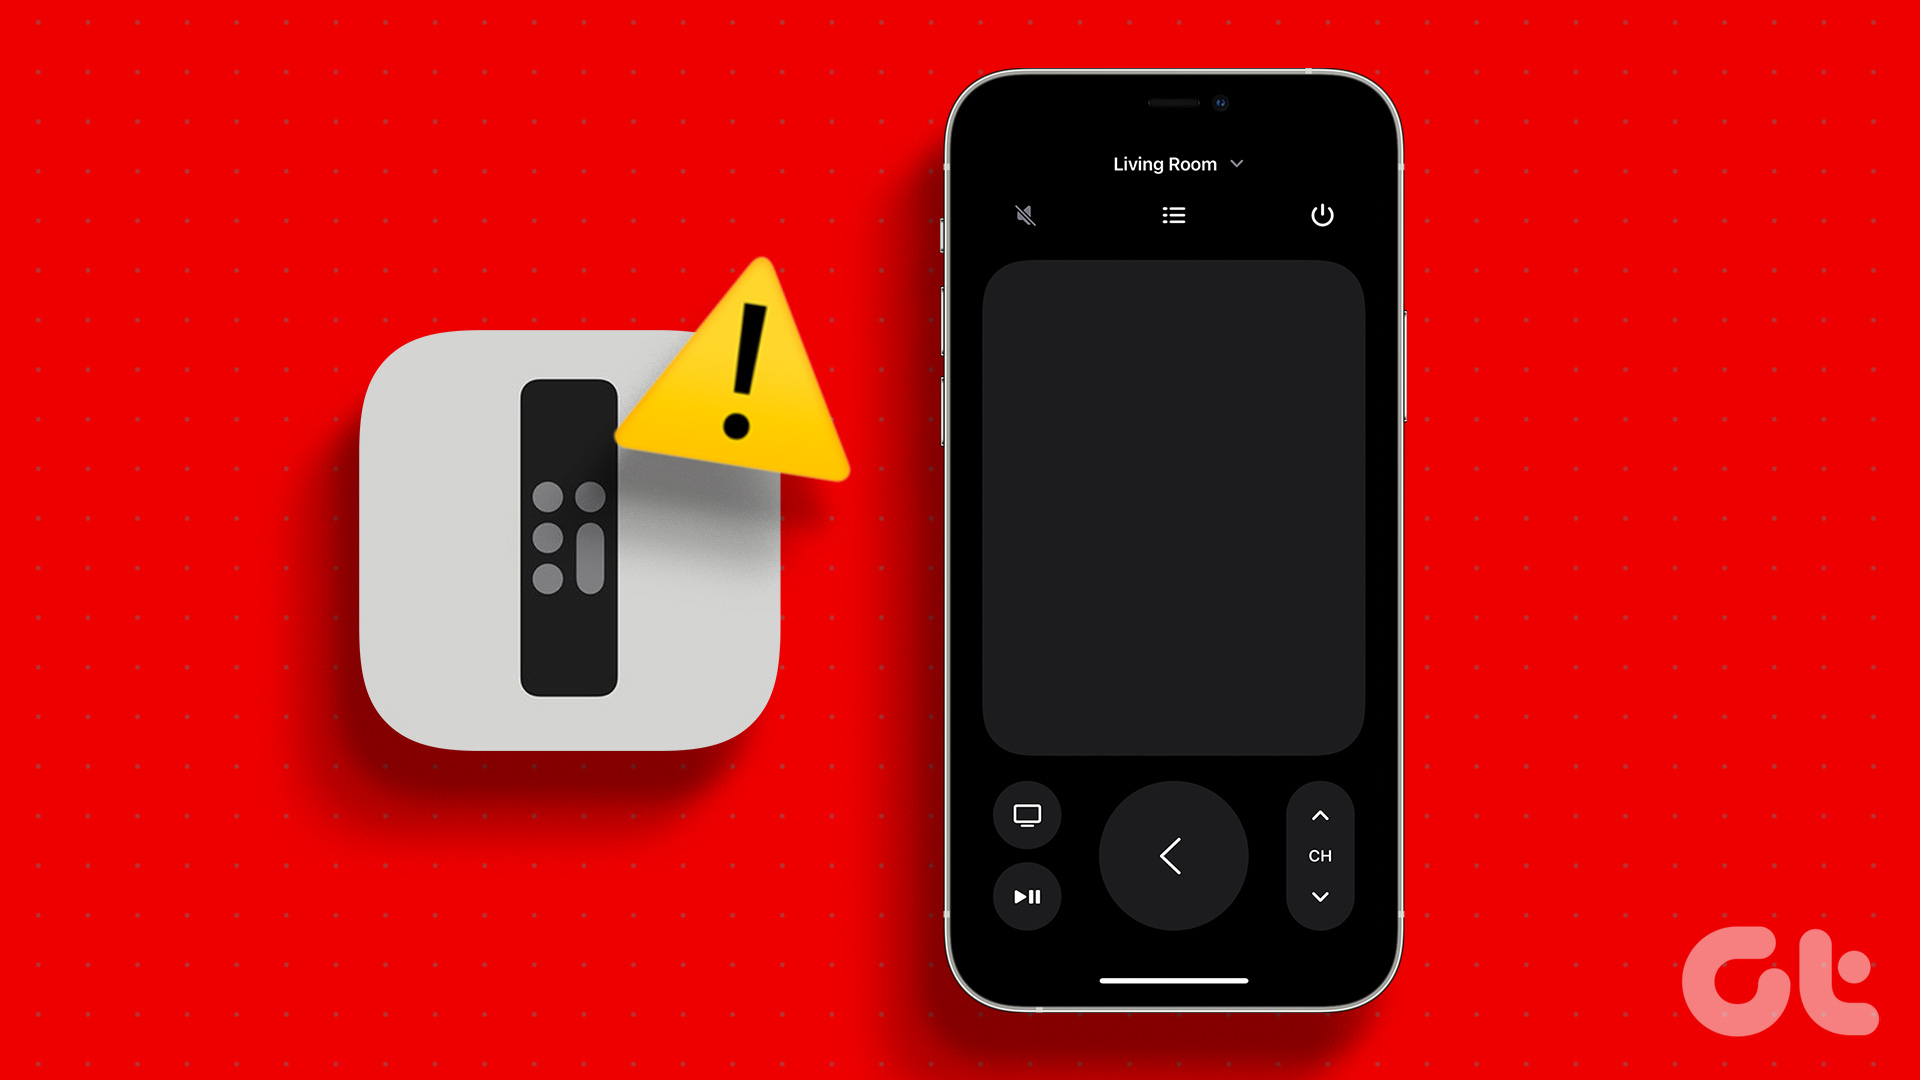 Supplement Site line designer 6 Best Fixes for Apple TV Remote App Not Working on iPhone - Guiding Tech